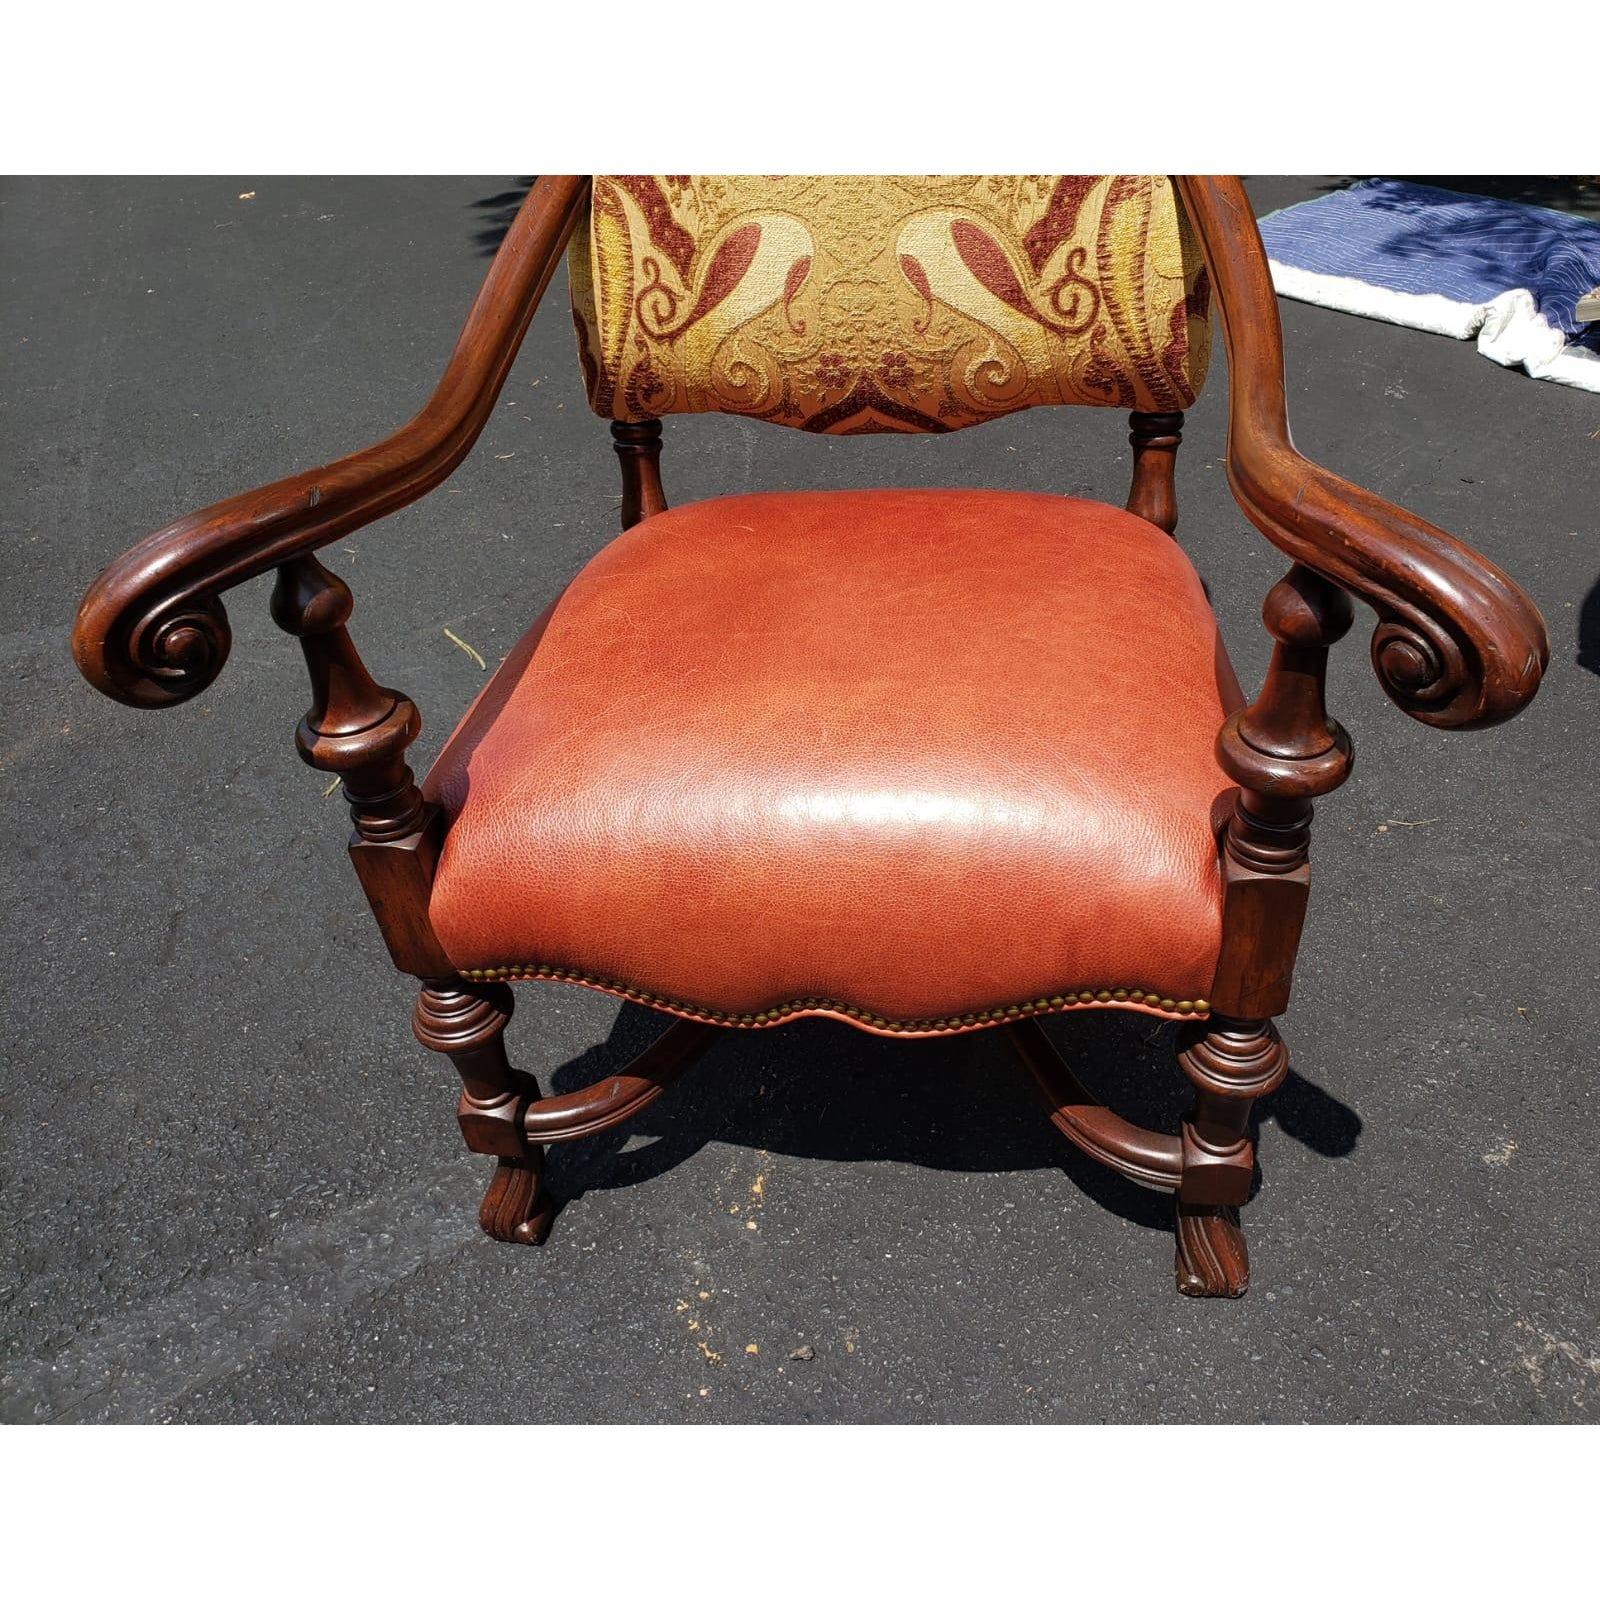 Oversized Amazing Louis XIII Imperial style chair with full grain leather seat and custom fabric upholstery. Beautiful nail trim.
High Back 53